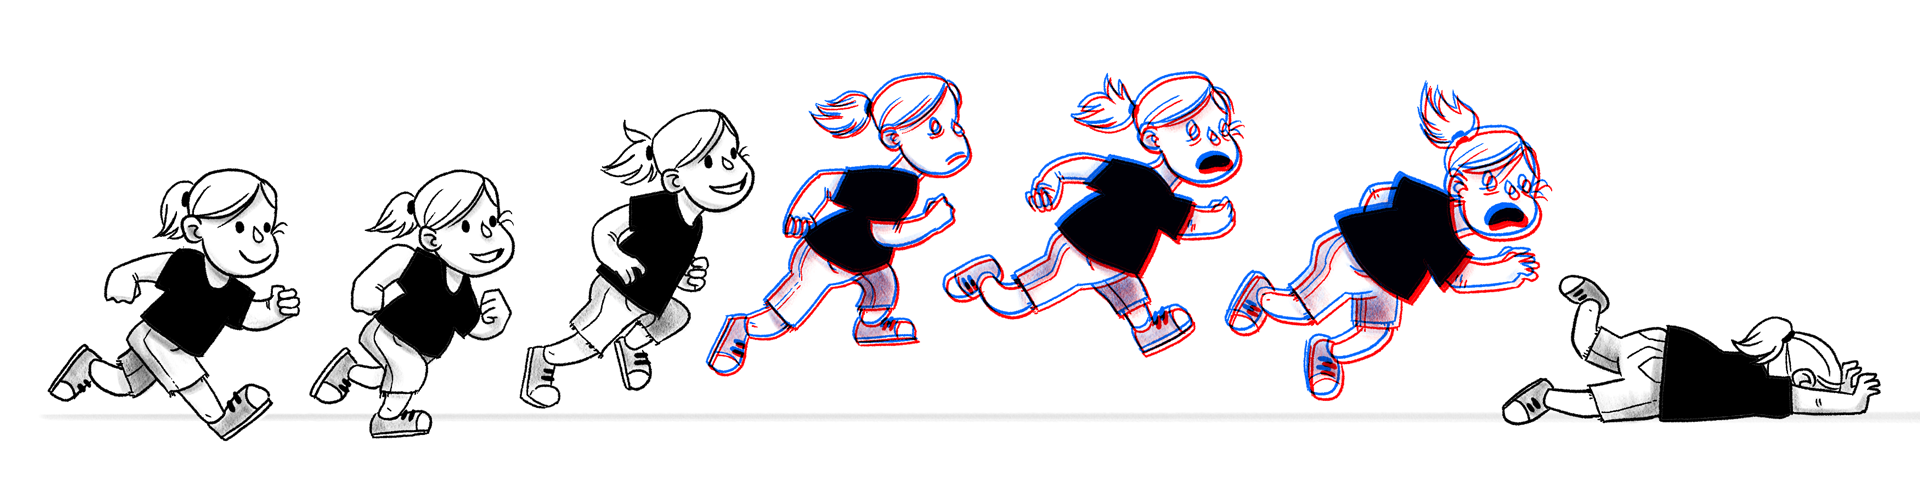 Illustration of a person running, jumping, and falling